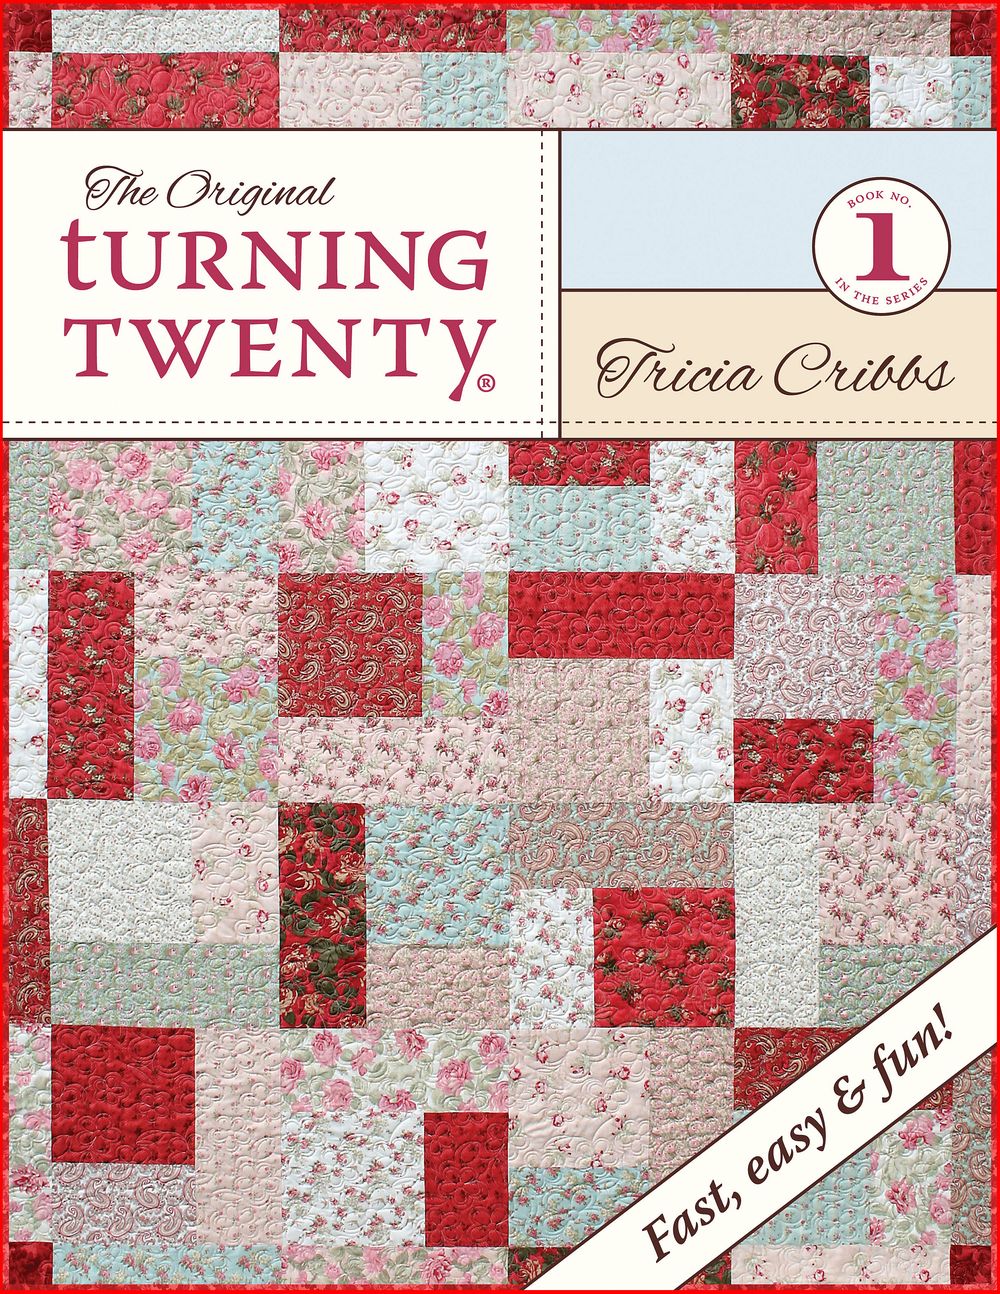 Turning Twenty (Original) Quilt Pattern Book by Tricia Cribbs of Friendfolks